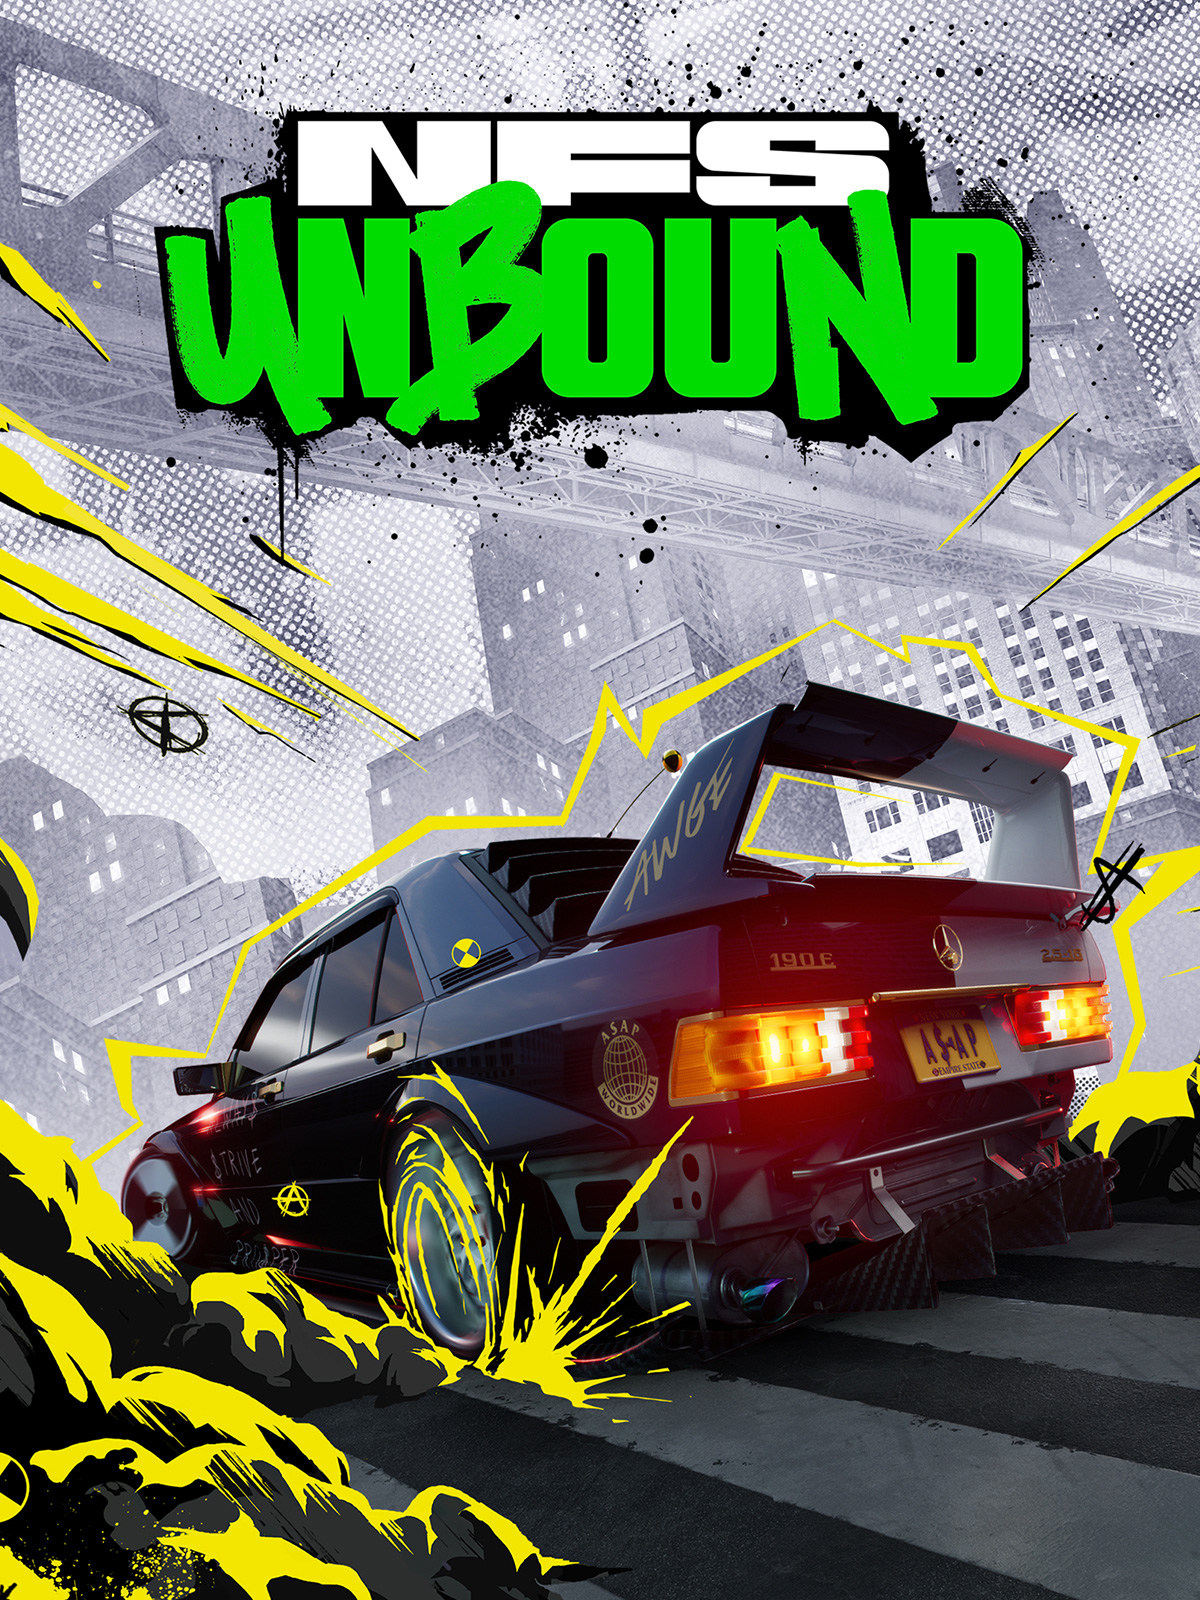 ⭐️🇷🇺РФ+СНГ Need for Speed Unbound STEAM GIFT